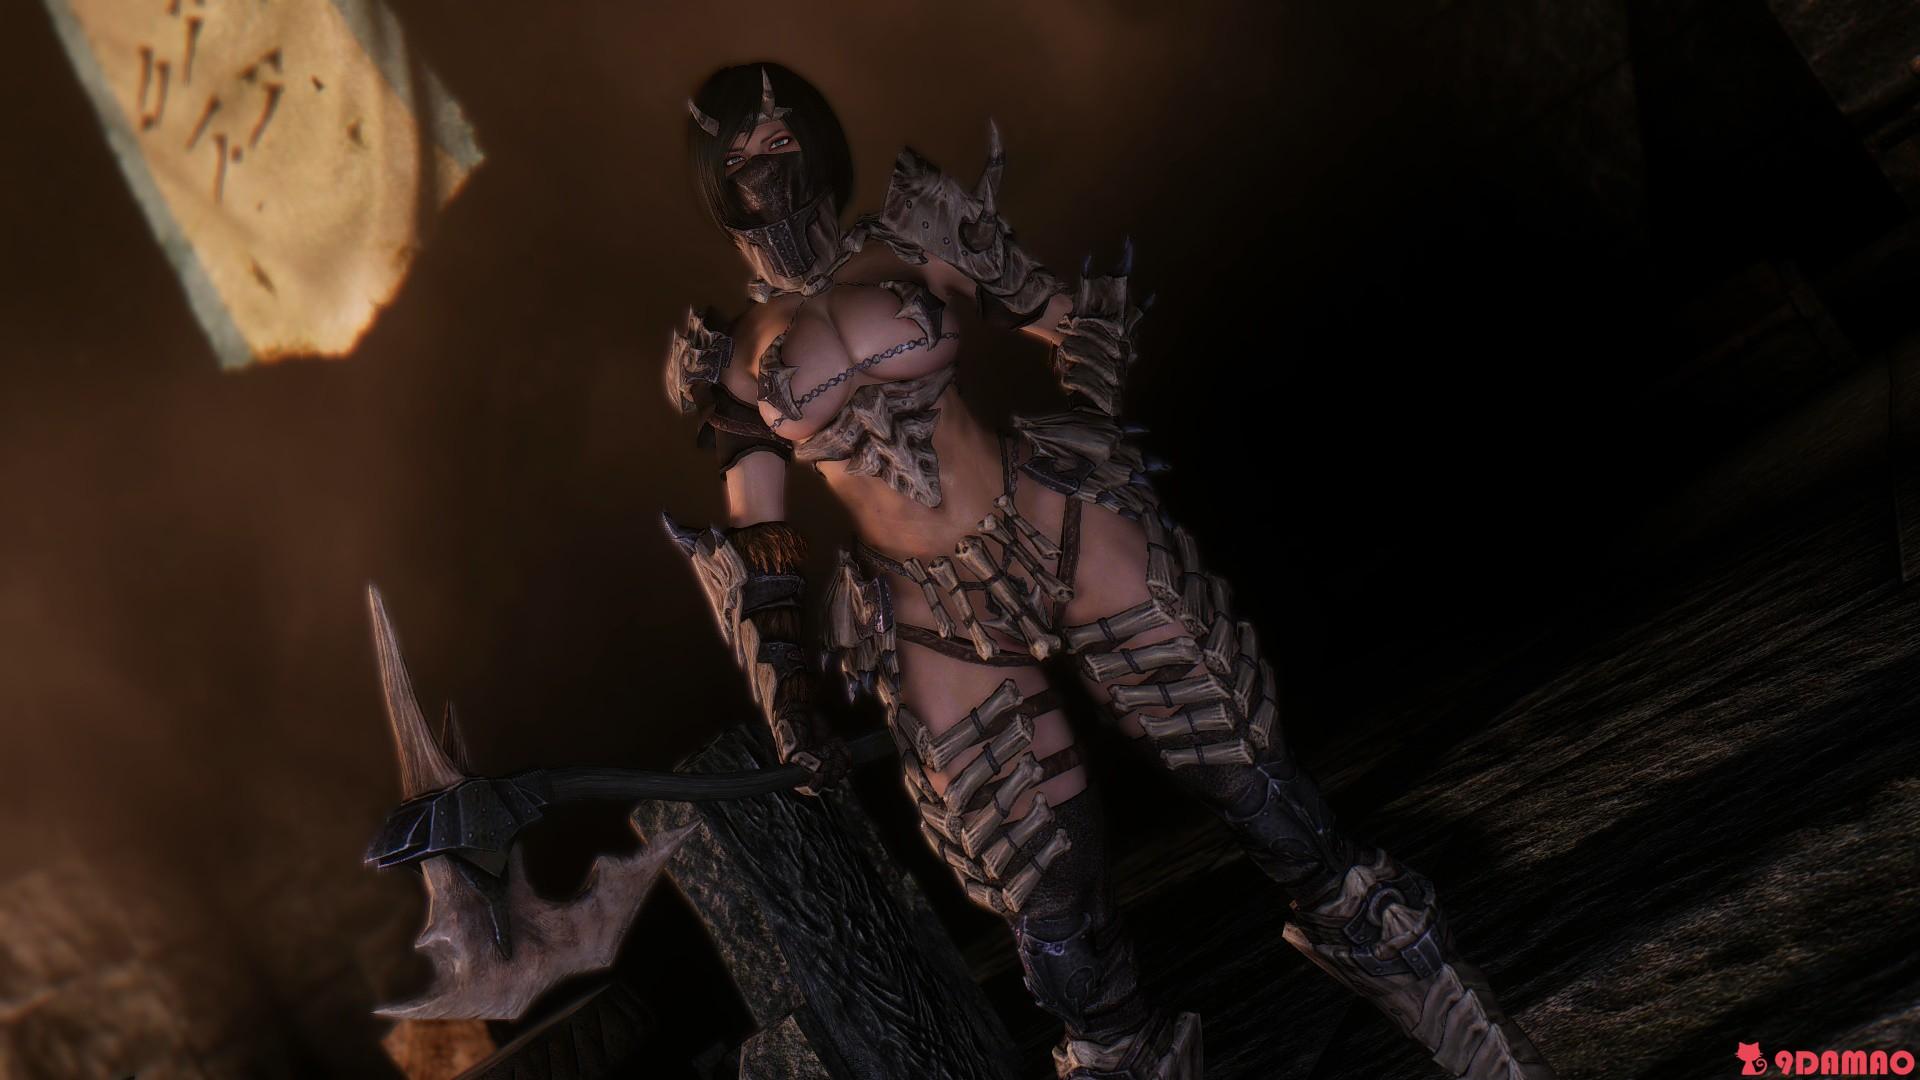 clare batchelor recommends skyrim bathing suit mod pic